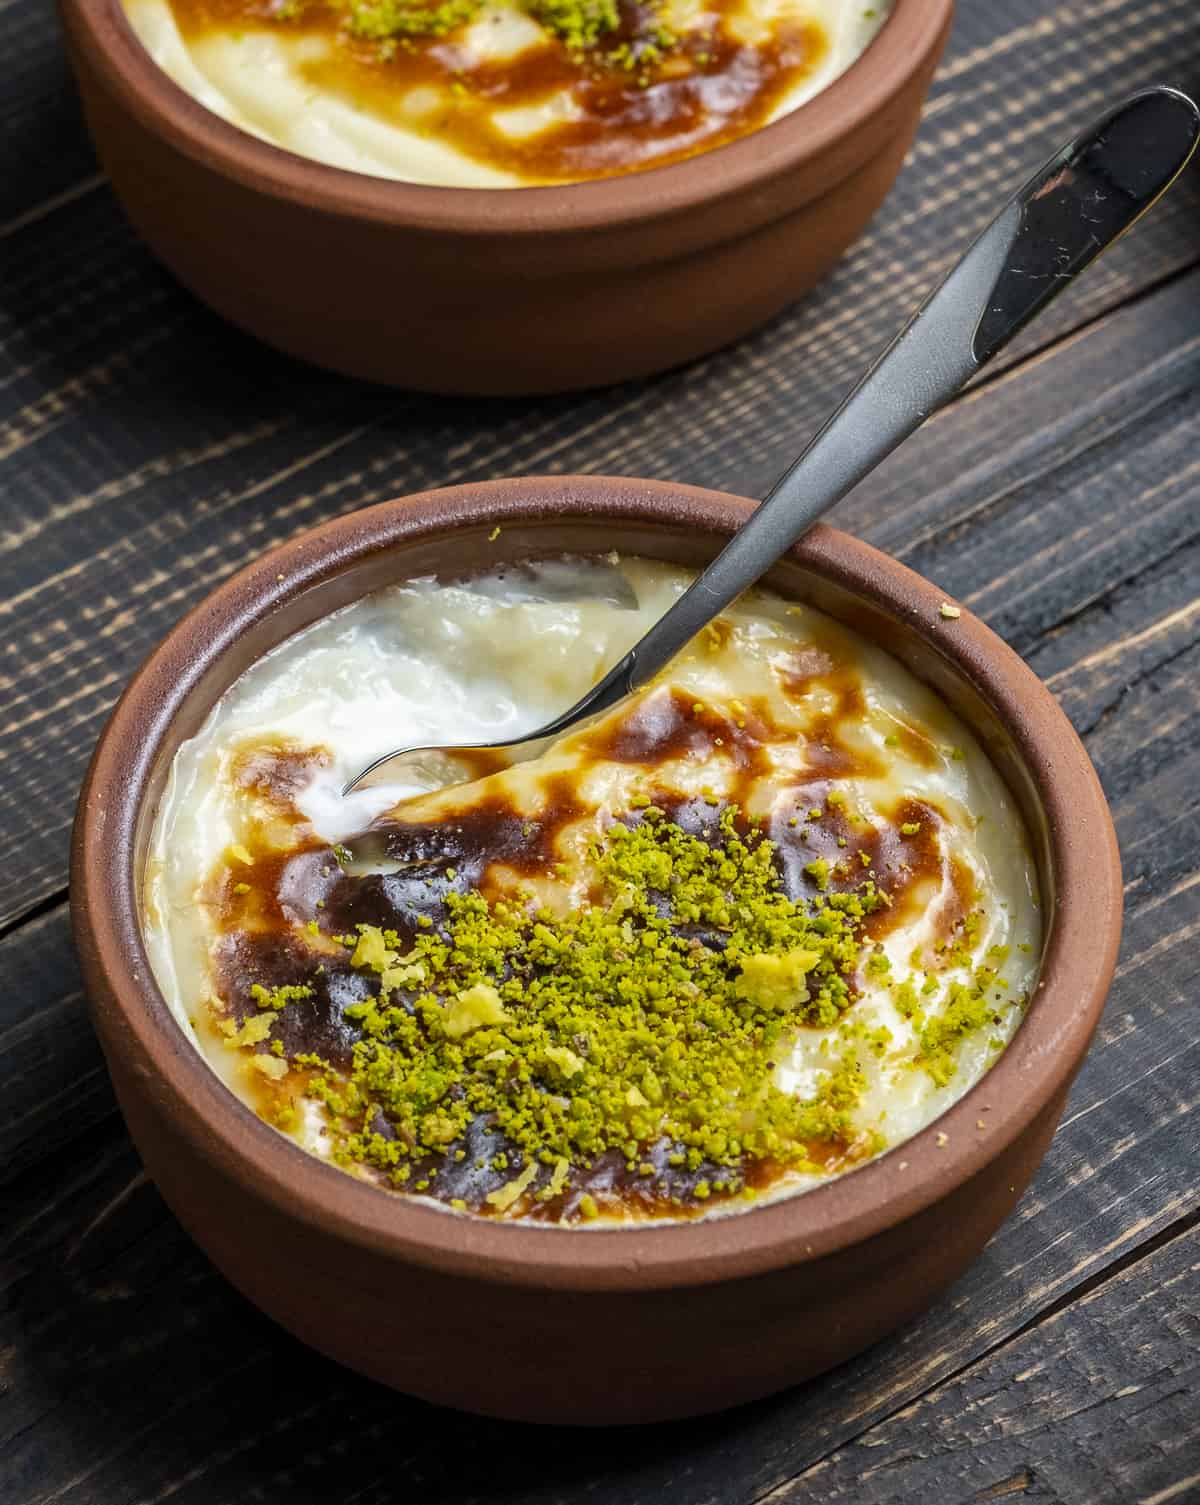 Sutlac garnished with pistachios in a clay bowl and a spoon in it.